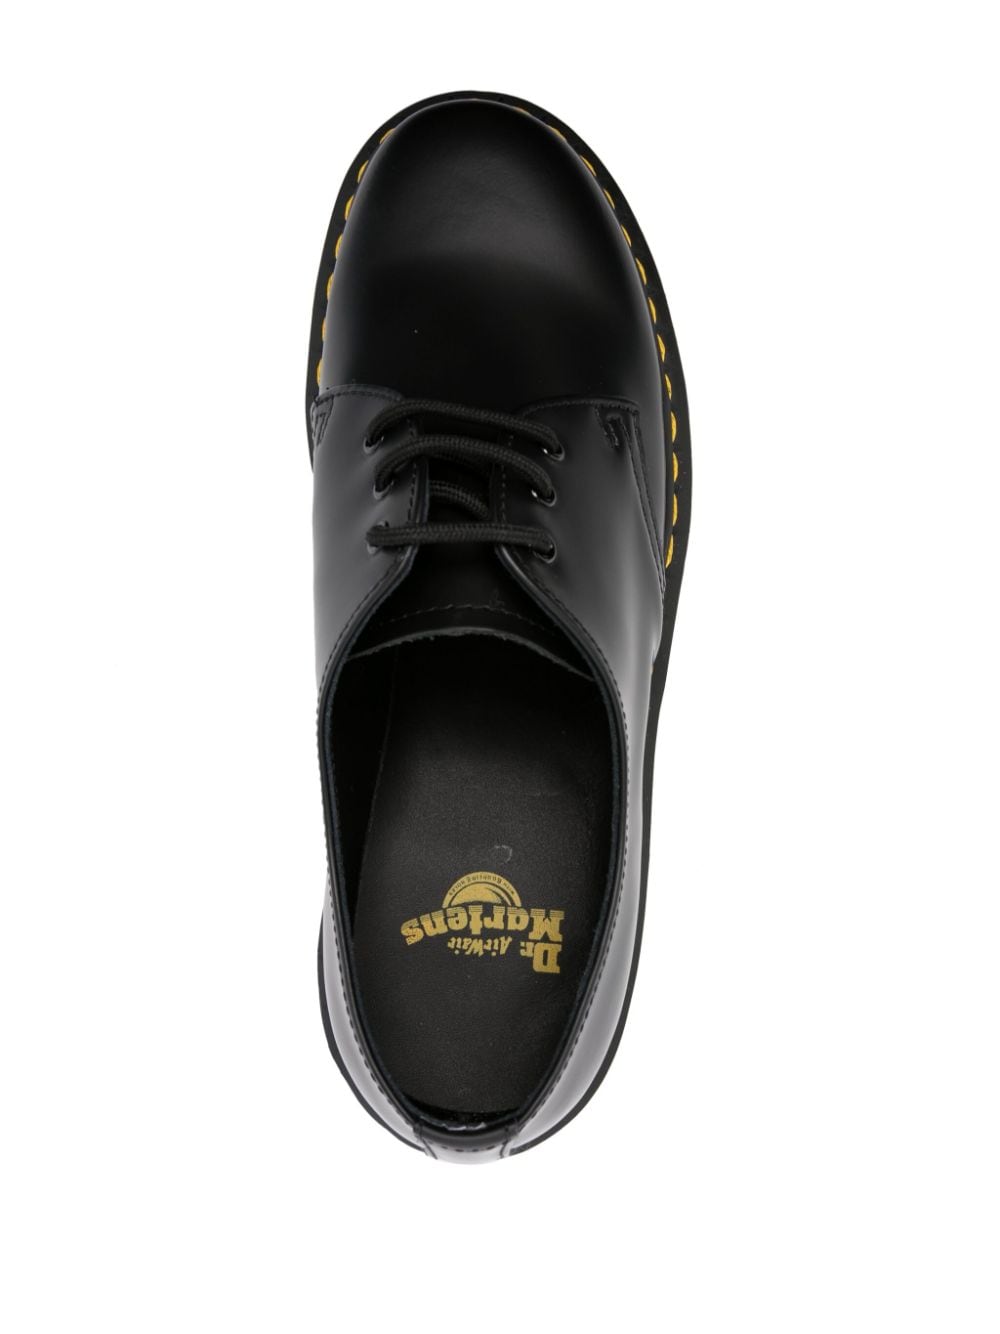 1461 Bex leather oxford shoes<BR/><BR/><BR/>